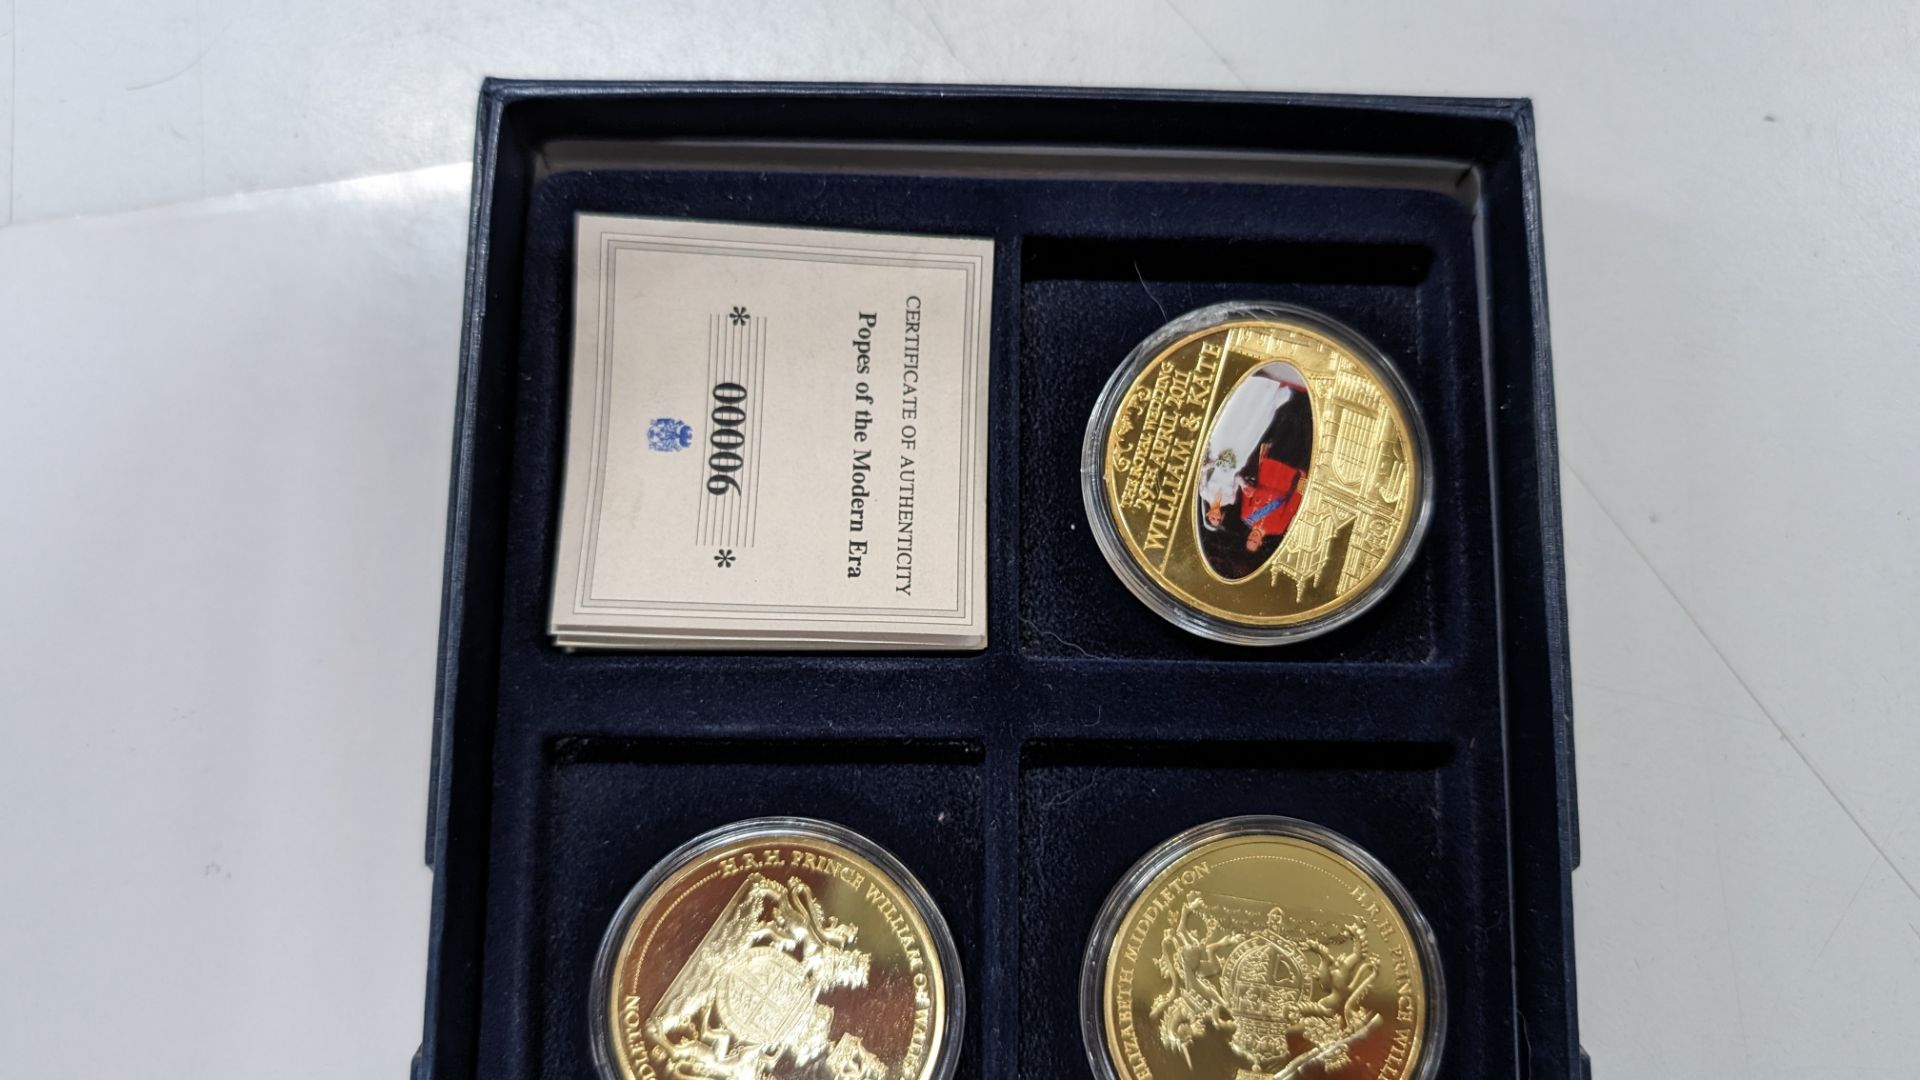 5 off assorted decorative coins as pictured including presentation box - Image 10 of 11